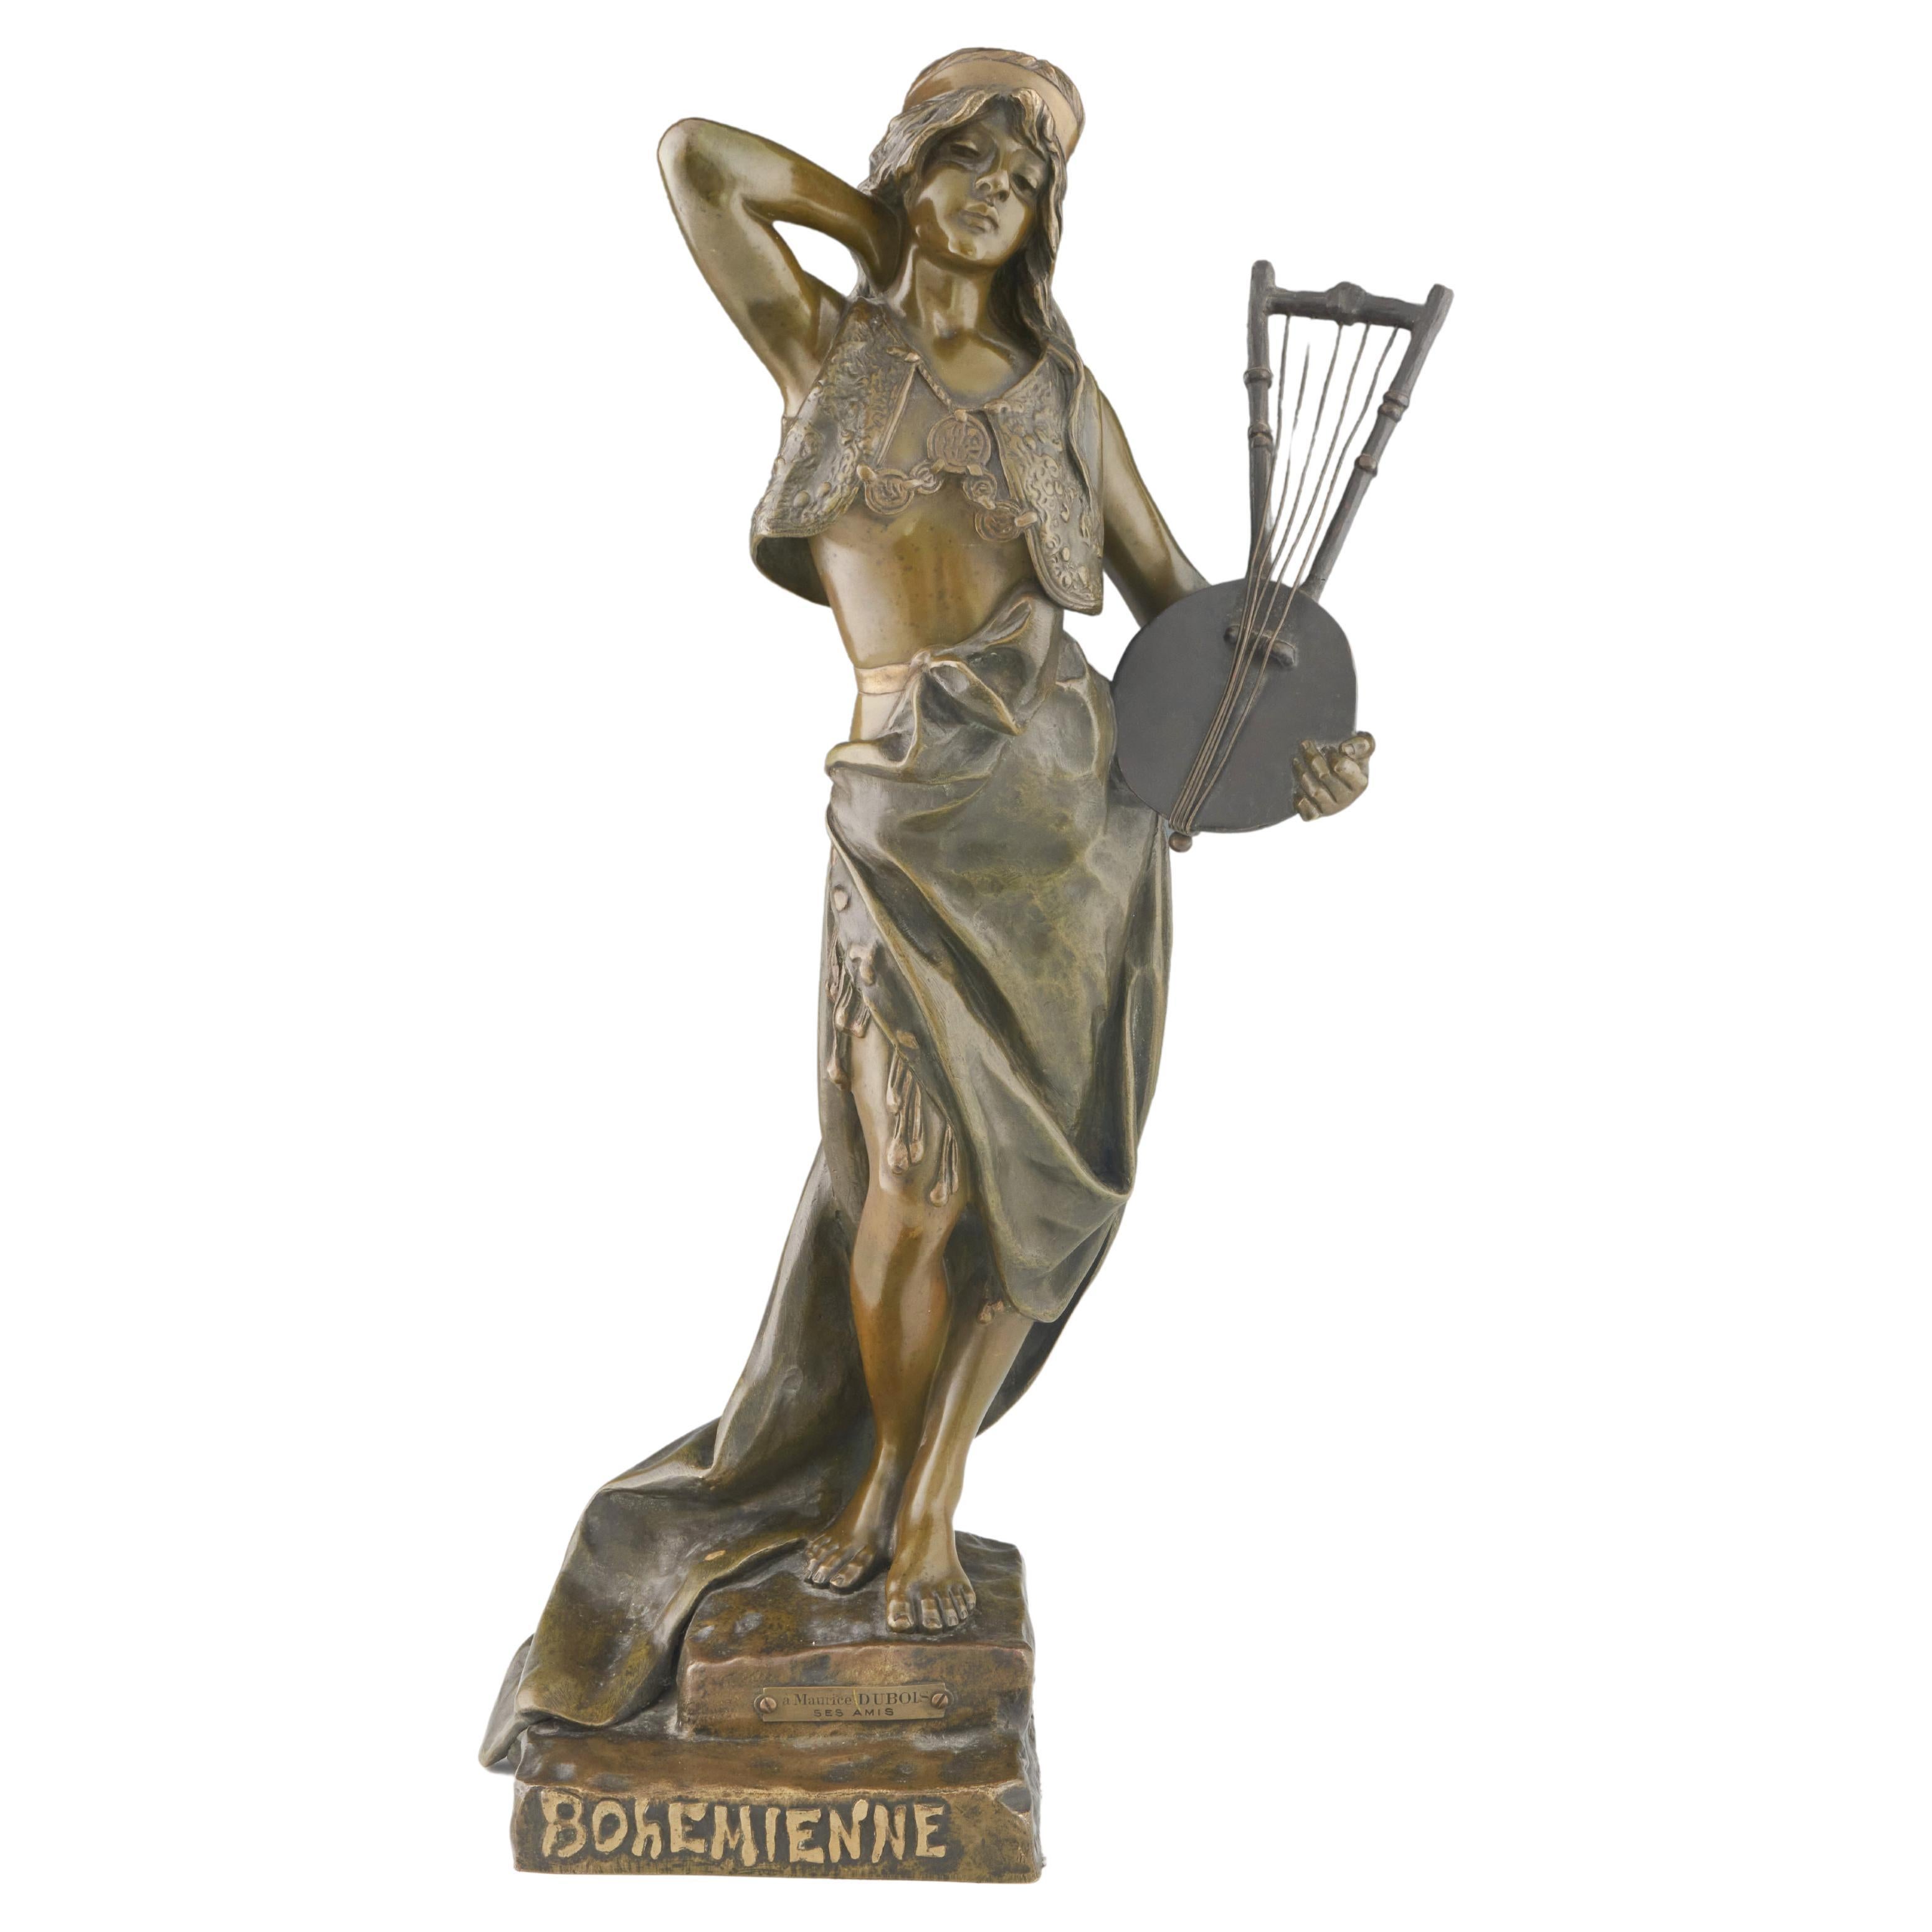 'Bohemienne' An Art Nouveau bronze sculpture by Emmanuel Villanis (1858-1914), depicting an elegant young woman holding a lyre with her other arm raised behind her head with robes flowing down. Excellent rich brown patination with fine detail.